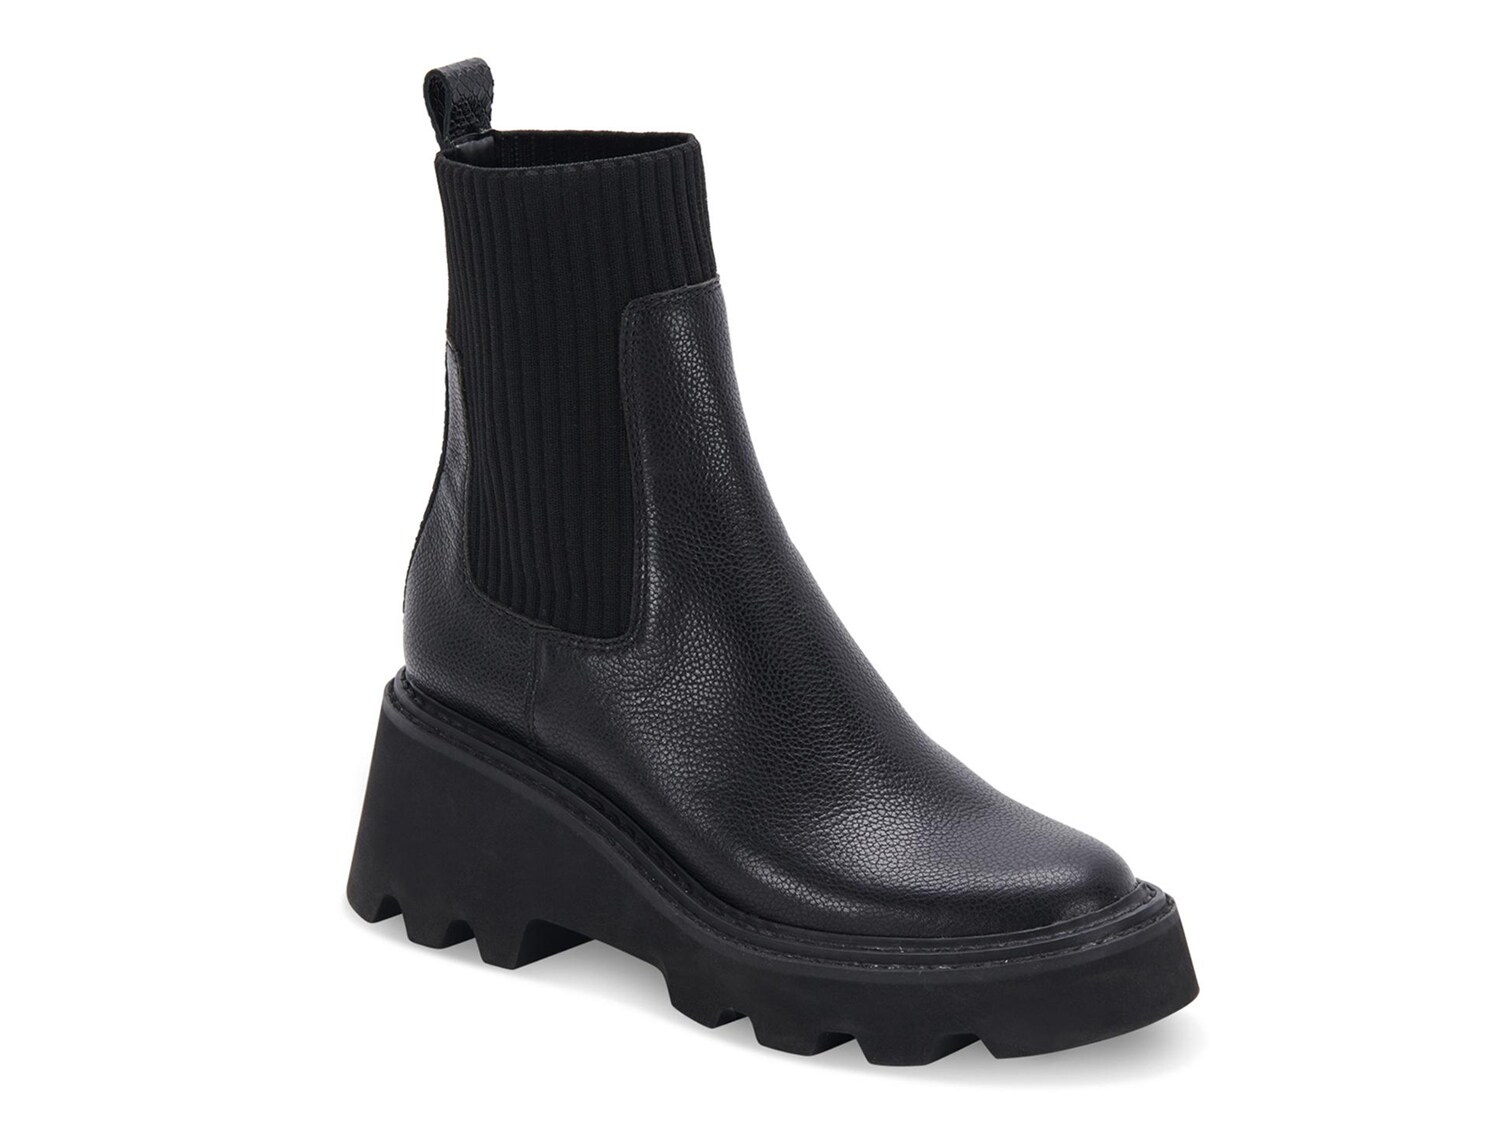 Dolce Vita Hoven H2O Waterproof Boot - Free Shipping | DSW